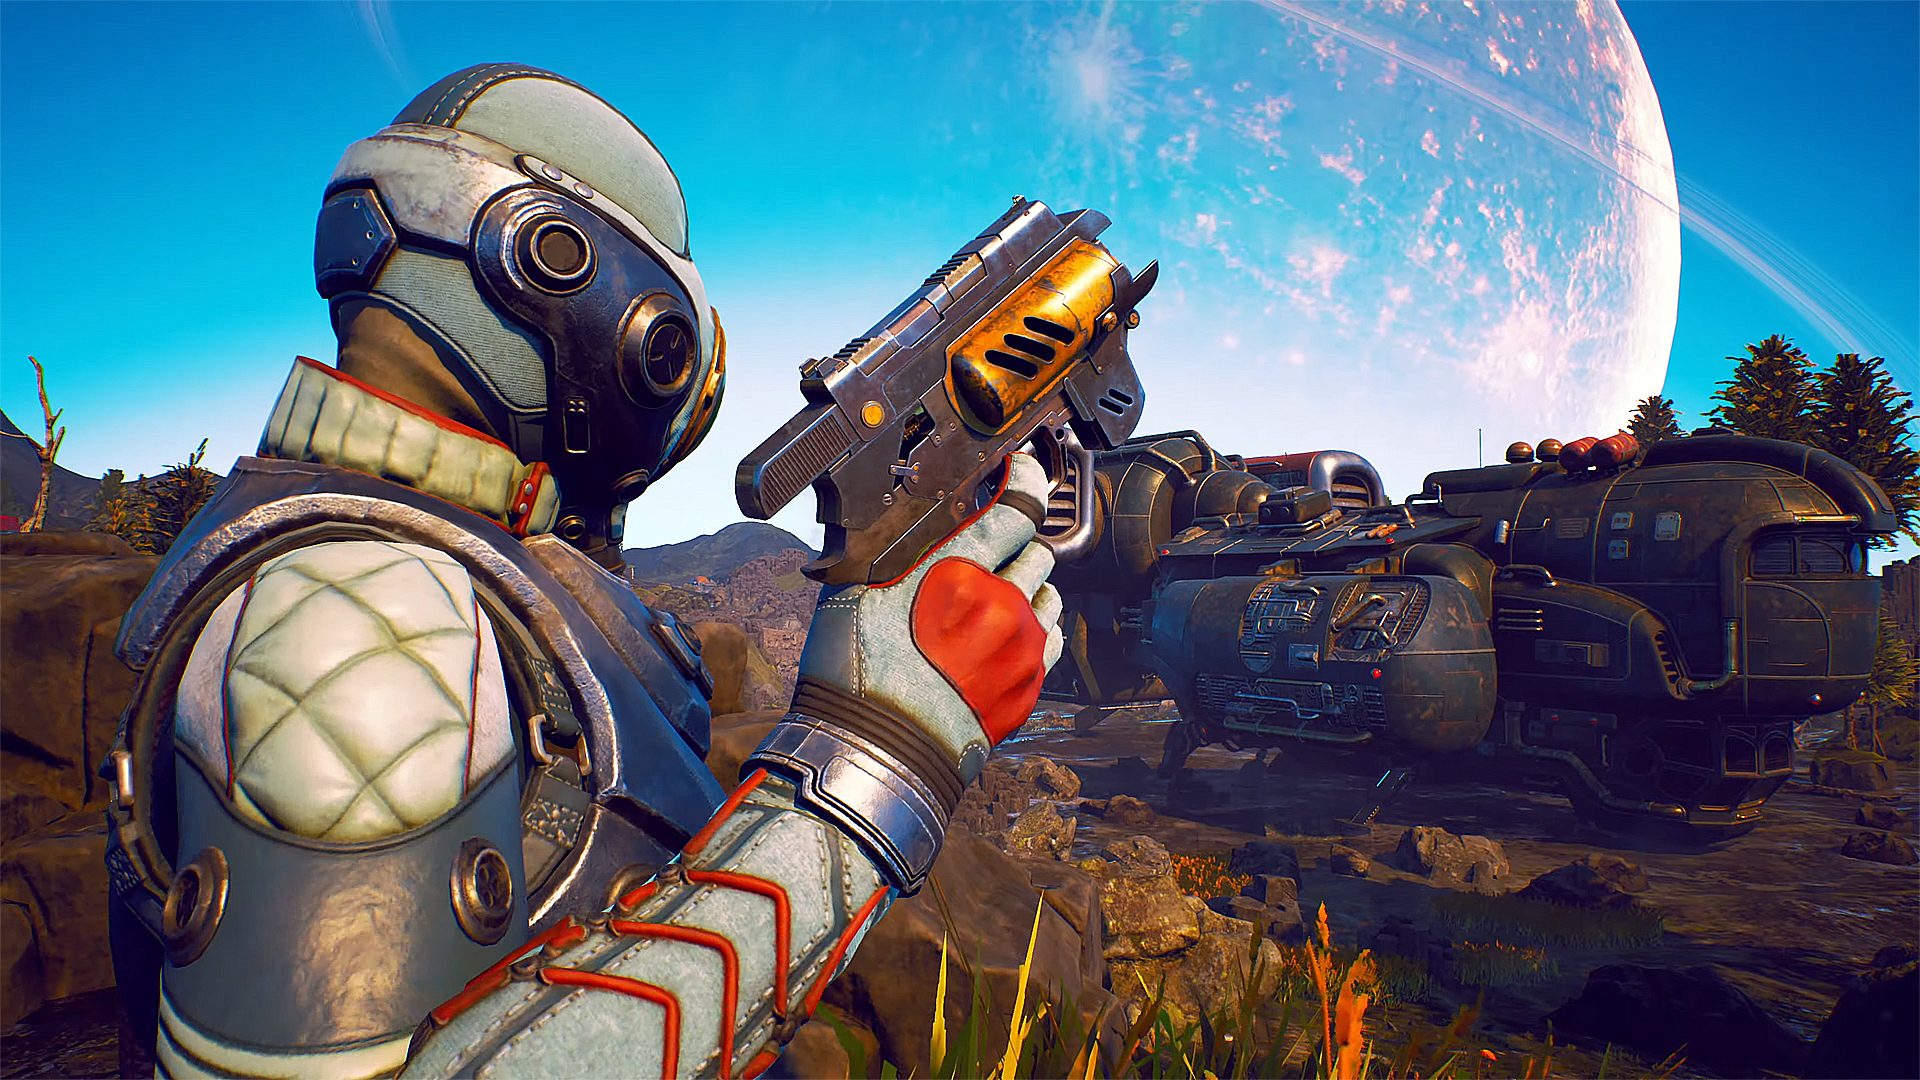 The Outer Worlds Review – The Definition of a Mixed-Bag